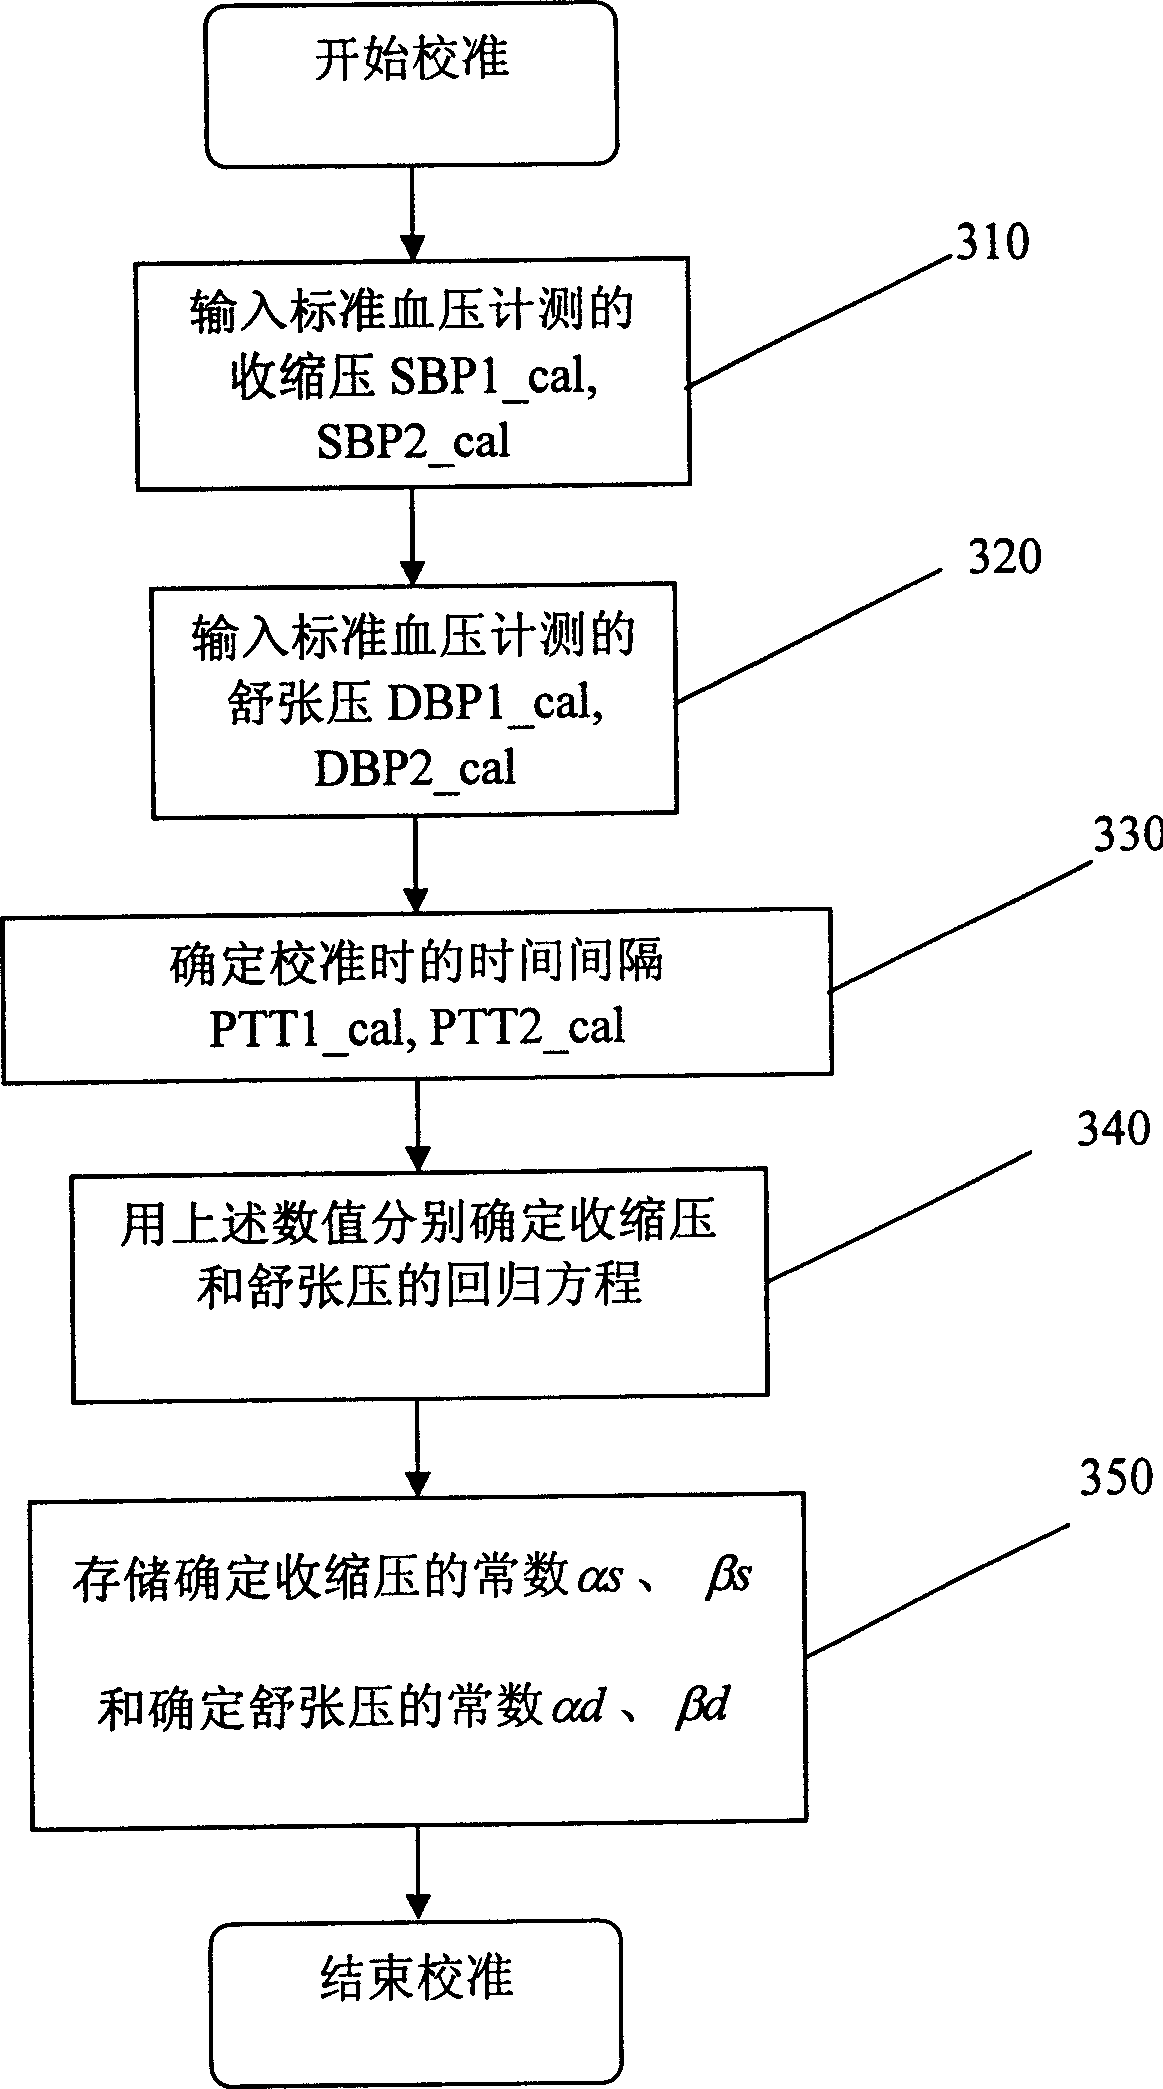 Blood pressure measuring device and method based on the pulse information of radial artery